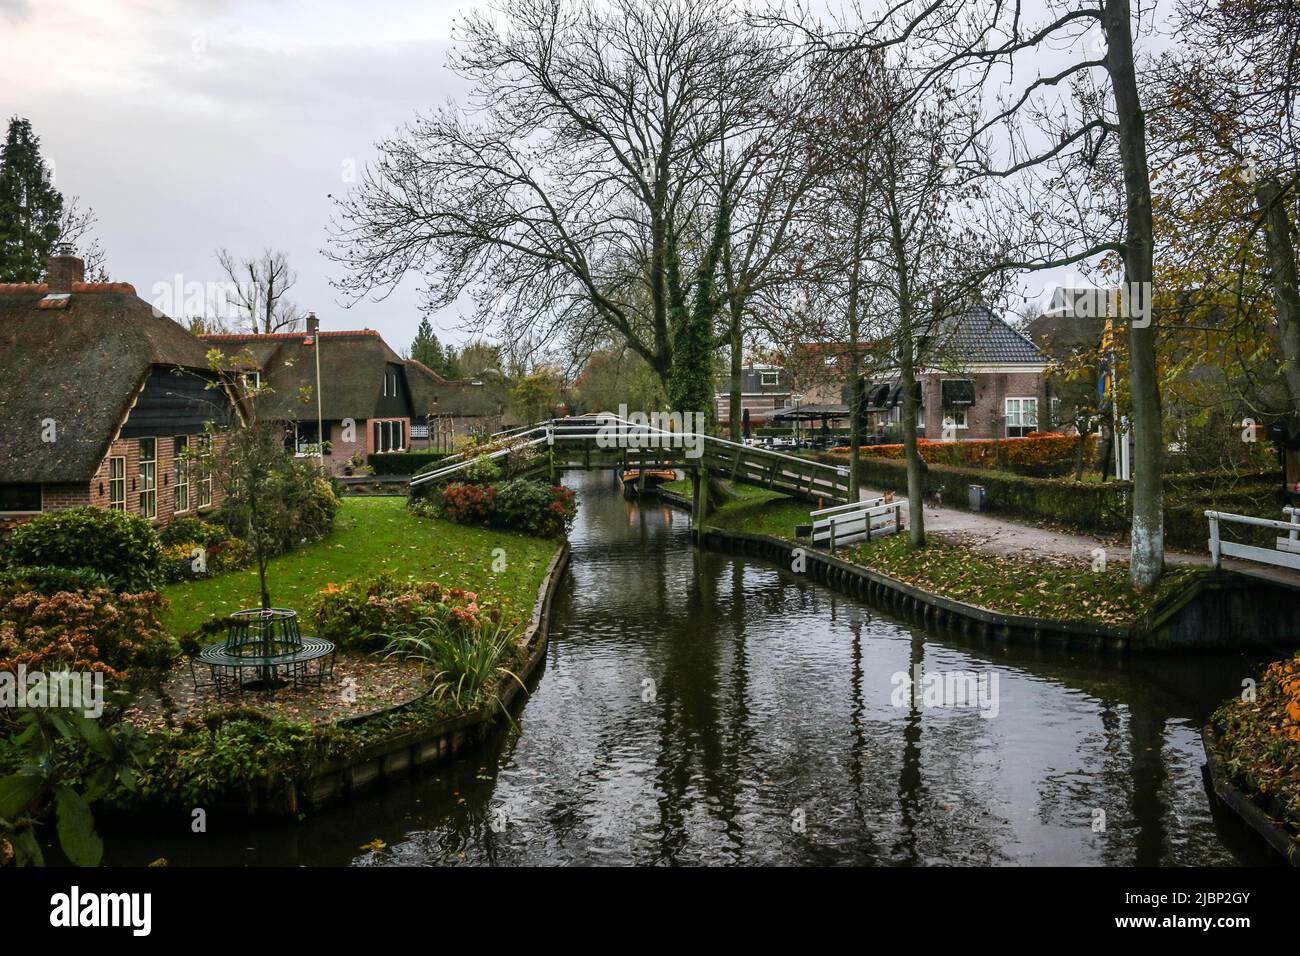 Views from the village of Giethoorn, the Netherlands Stock Photo